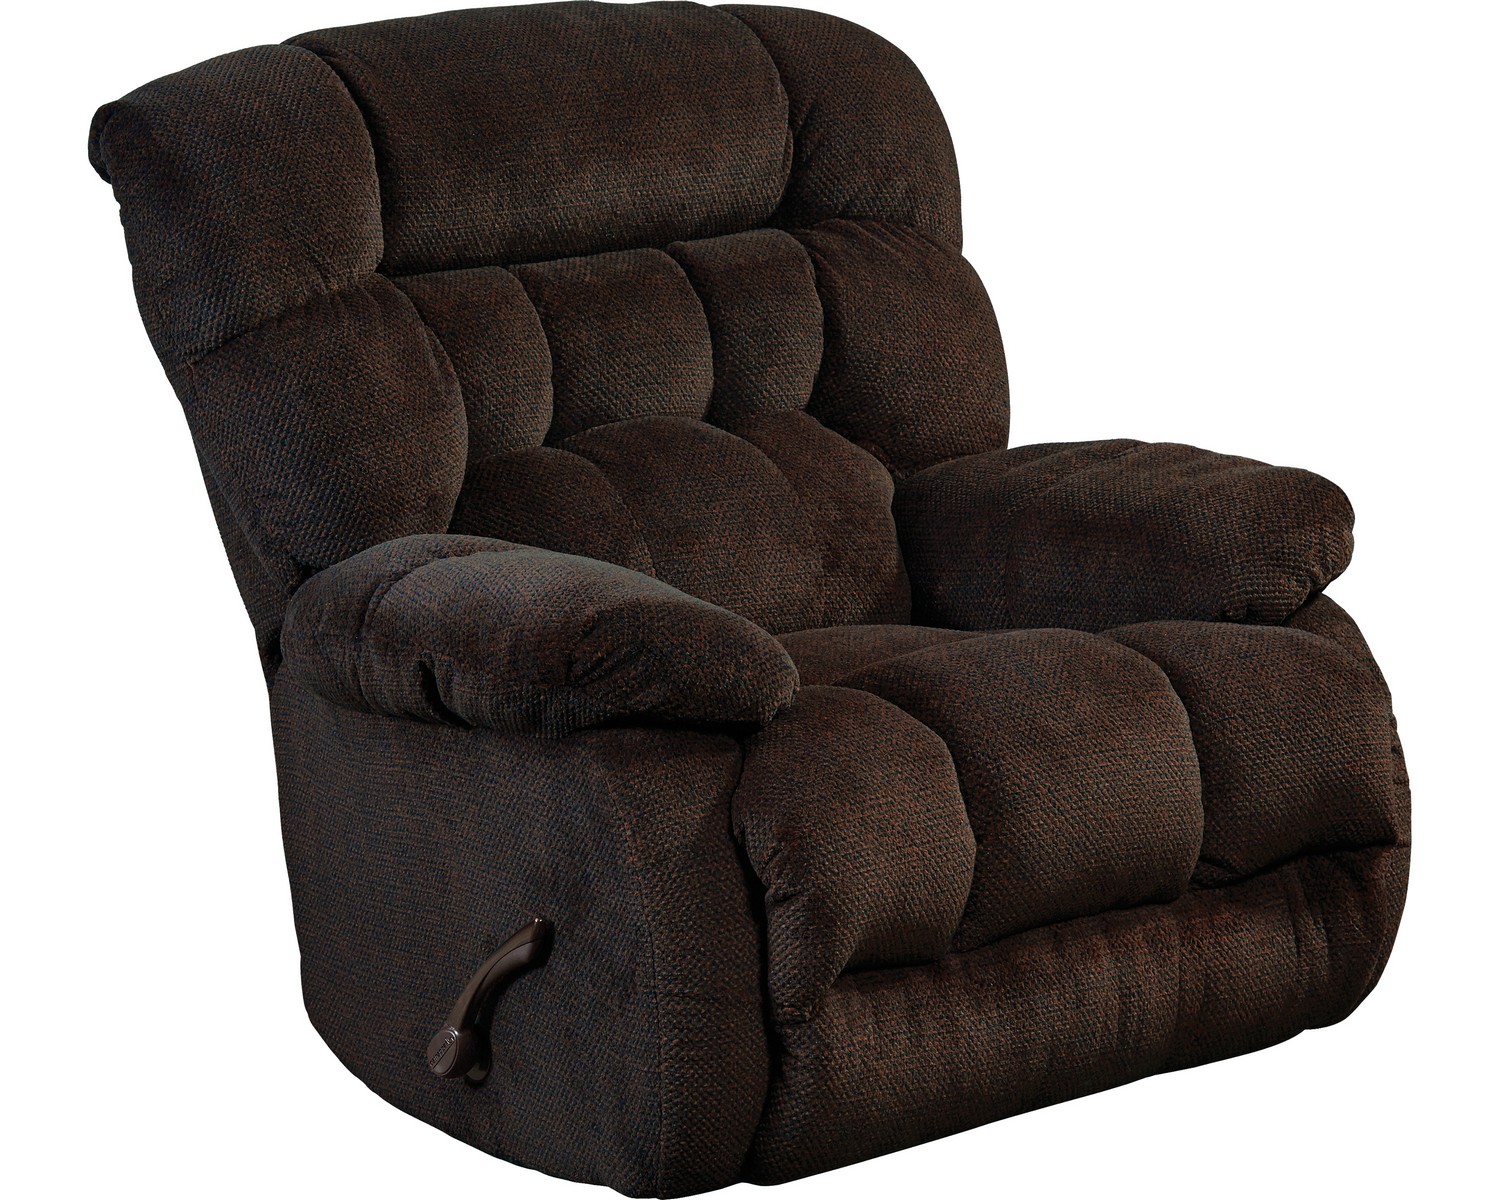 CatNapper Daly Chaise Swivel Glider Recliner - Chocolate